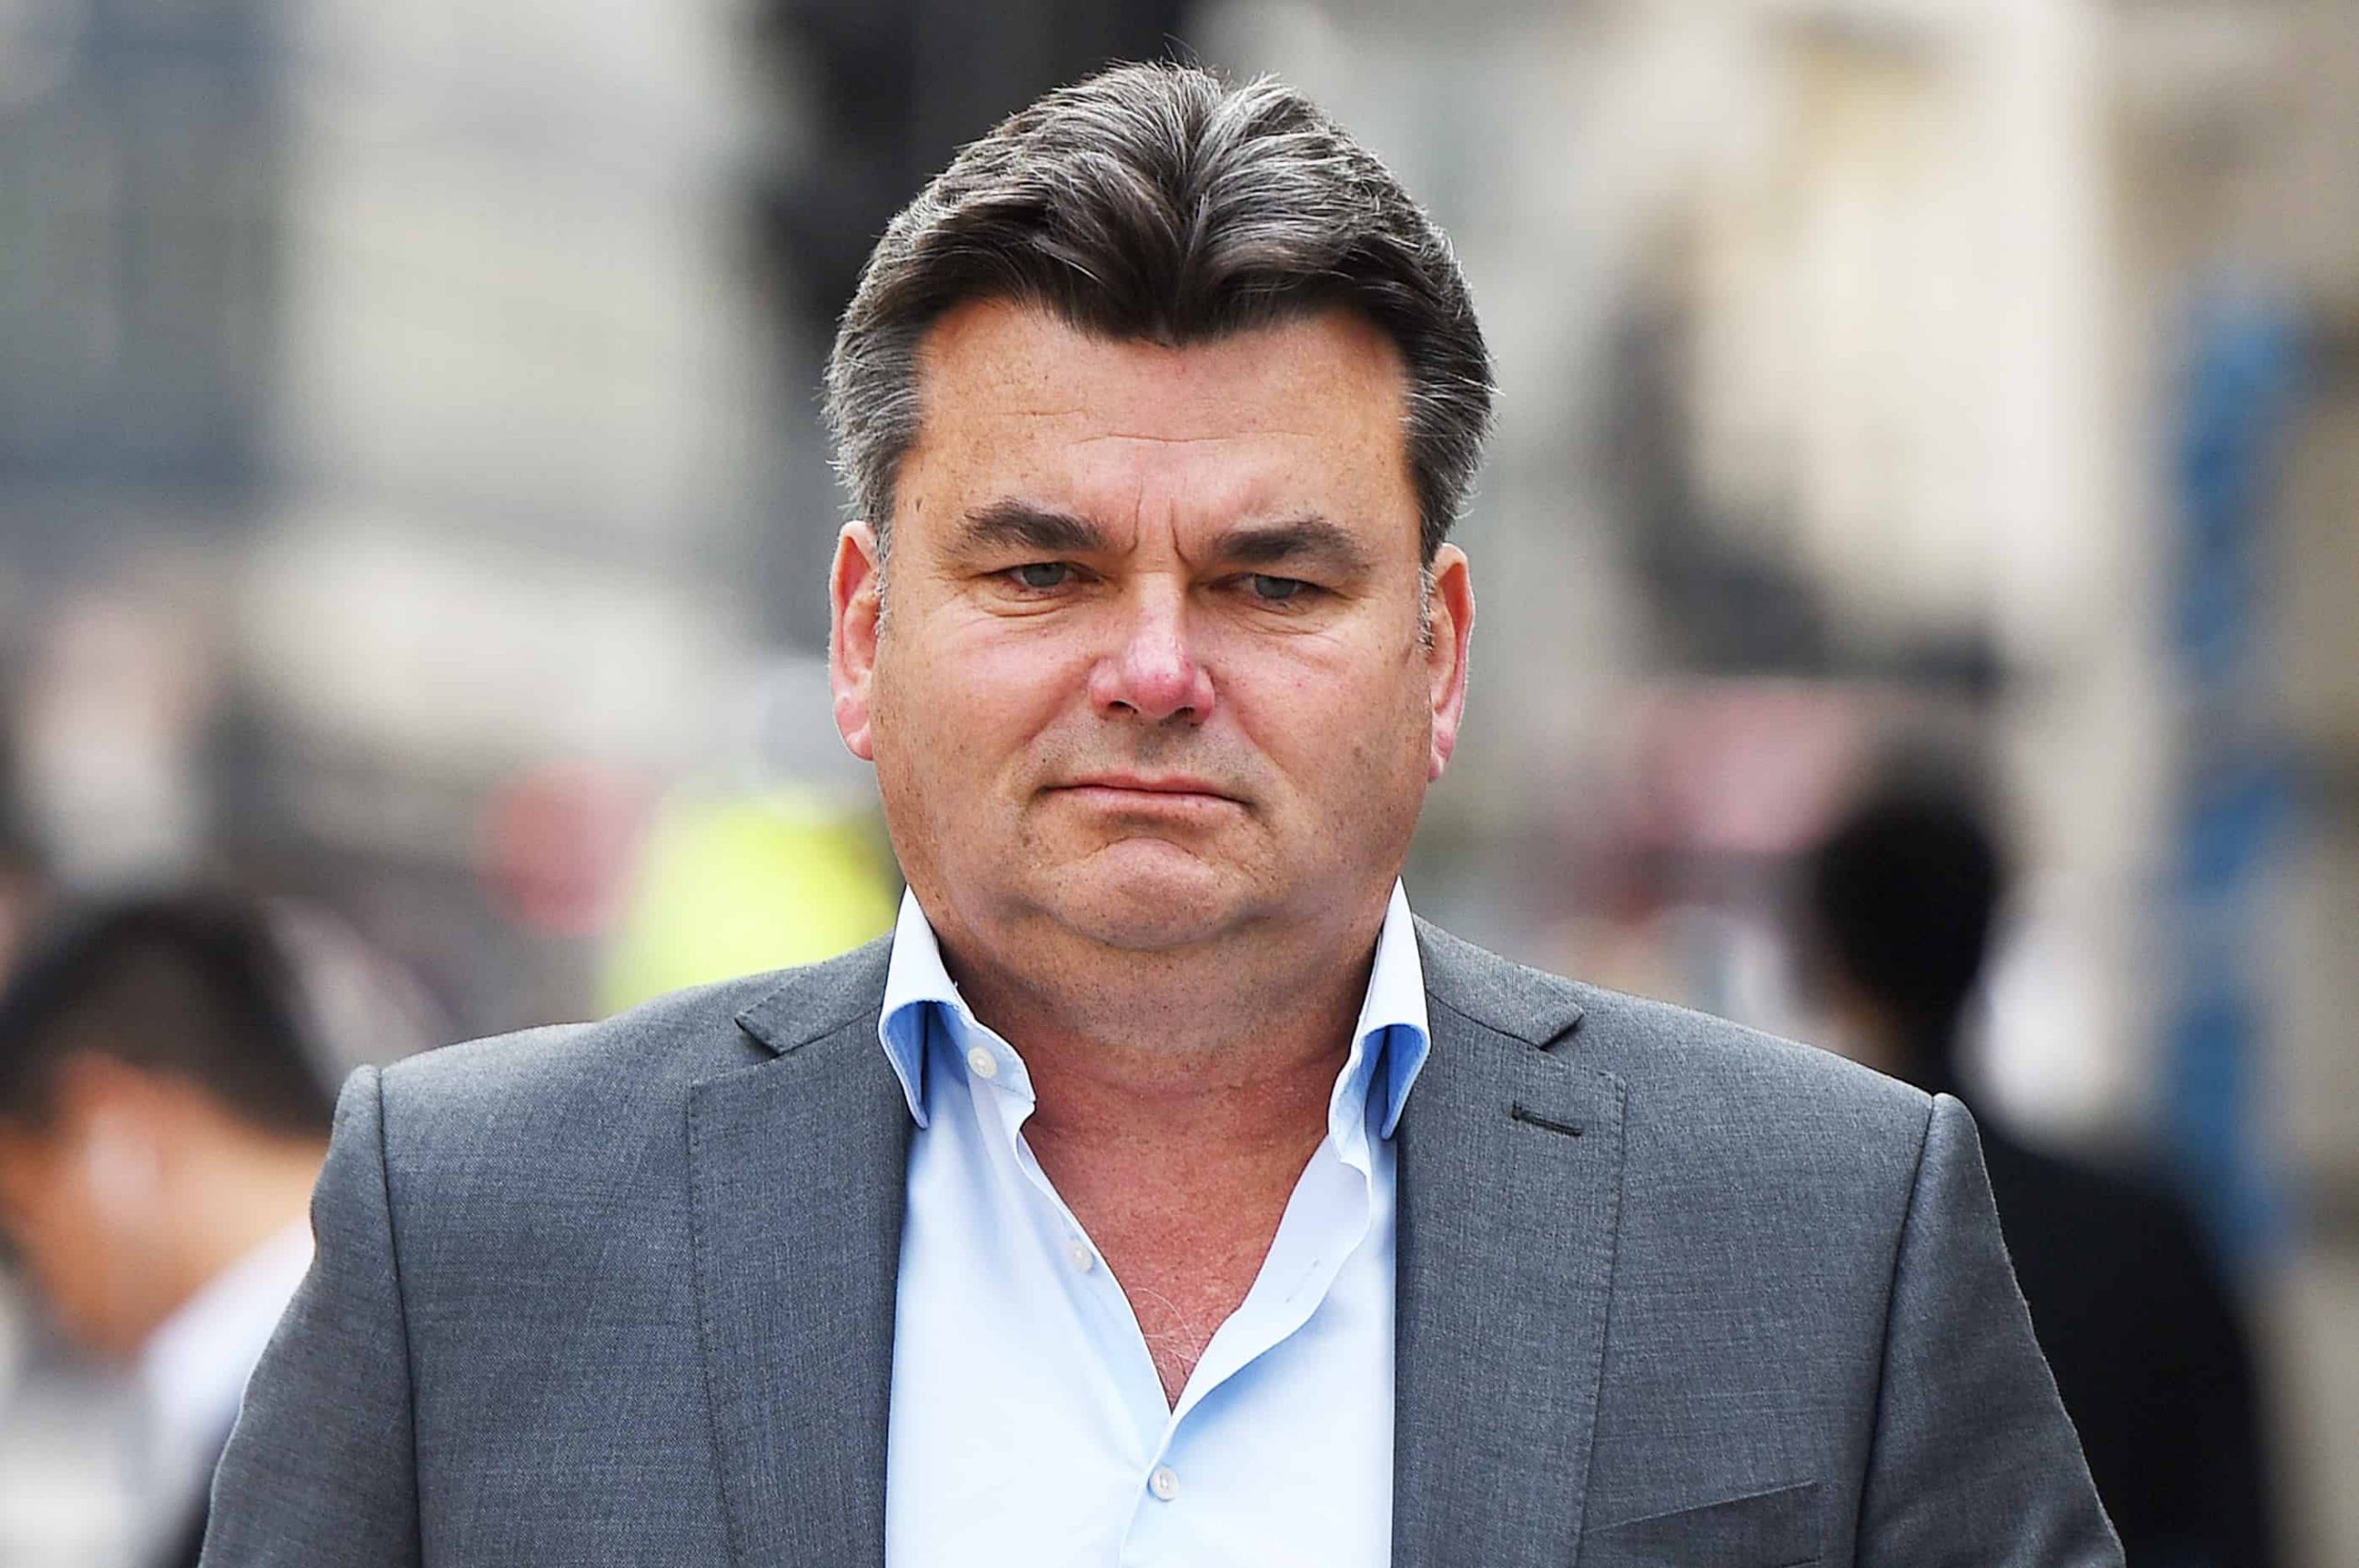 Former BHS owner Dominic Chappell ordered to pay £9.5m into pension schemes